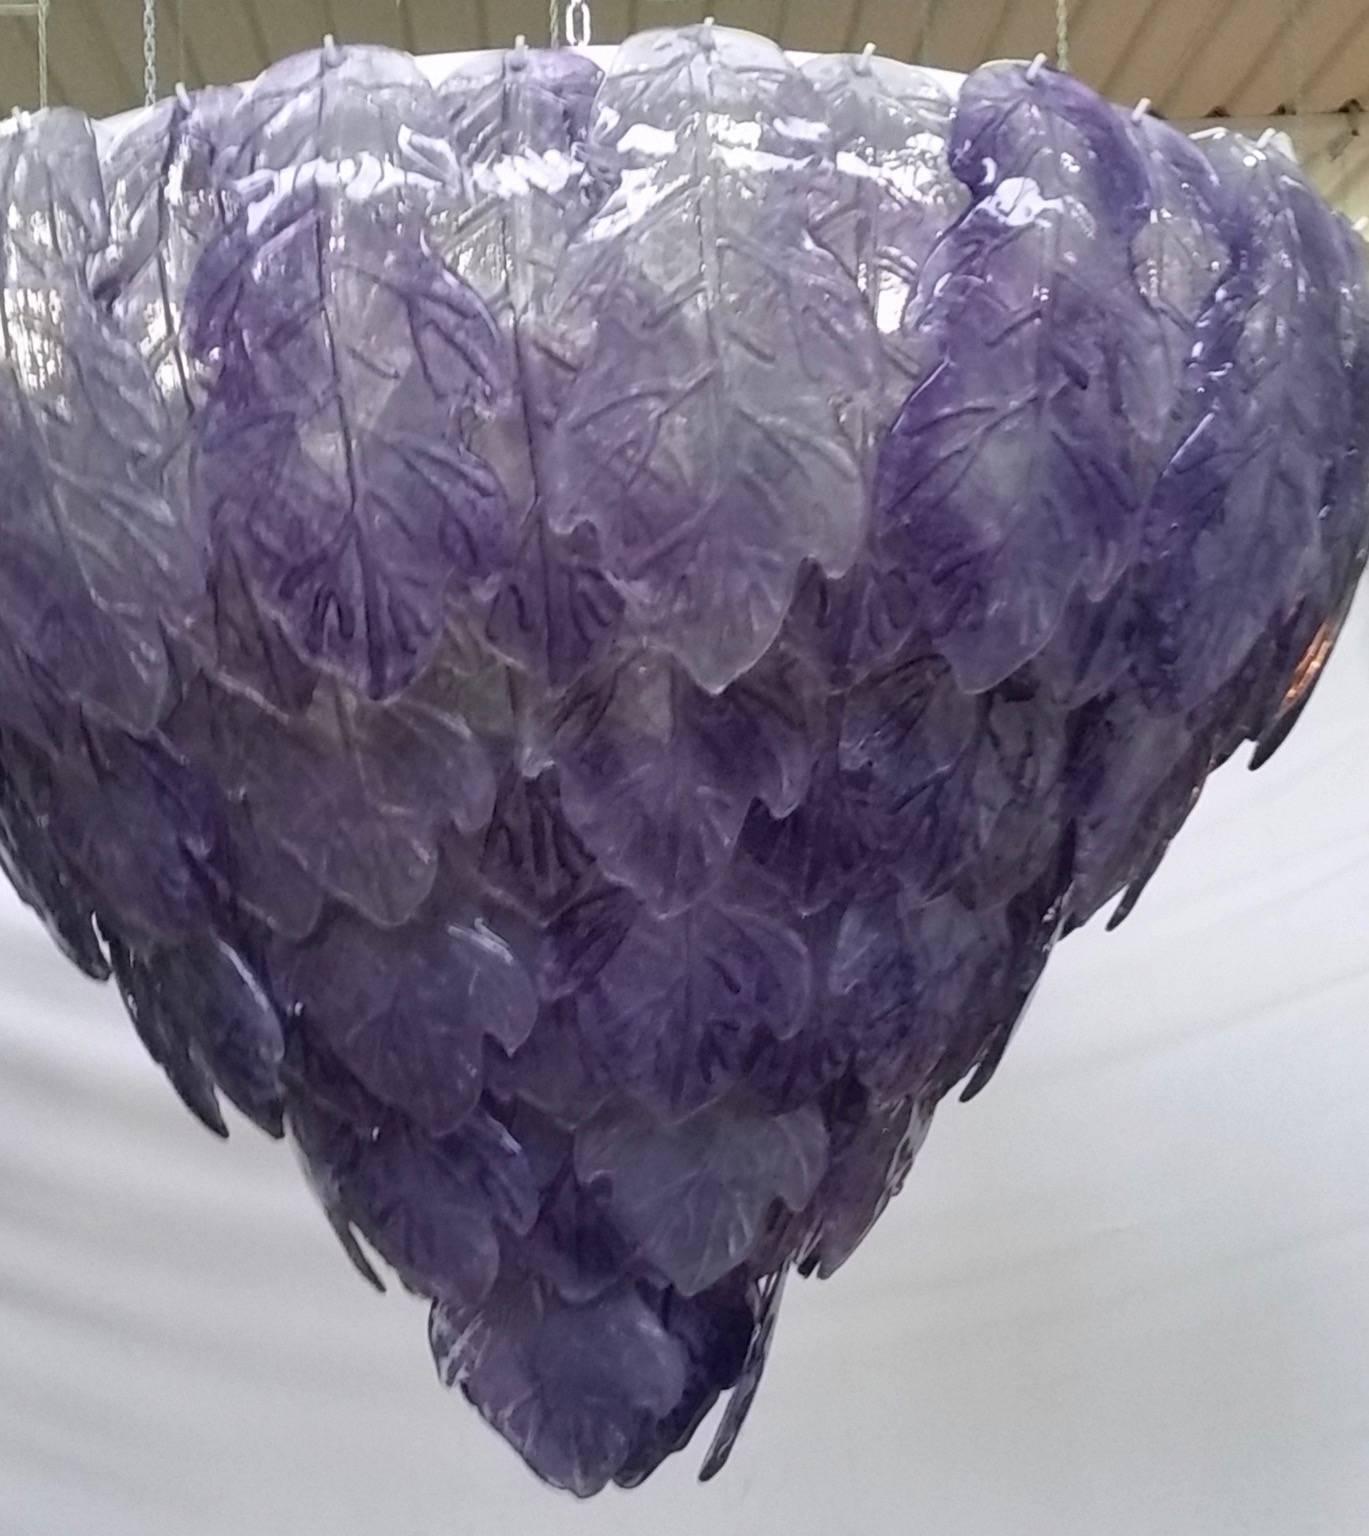 A cascade of leaves for this amethyst-colored chandelier. Murano art glass chandelier. Of the first half of the 20th century. Fantastic Venetian amethyst color. Put in evidence precisely from the first photo, a striking color for this